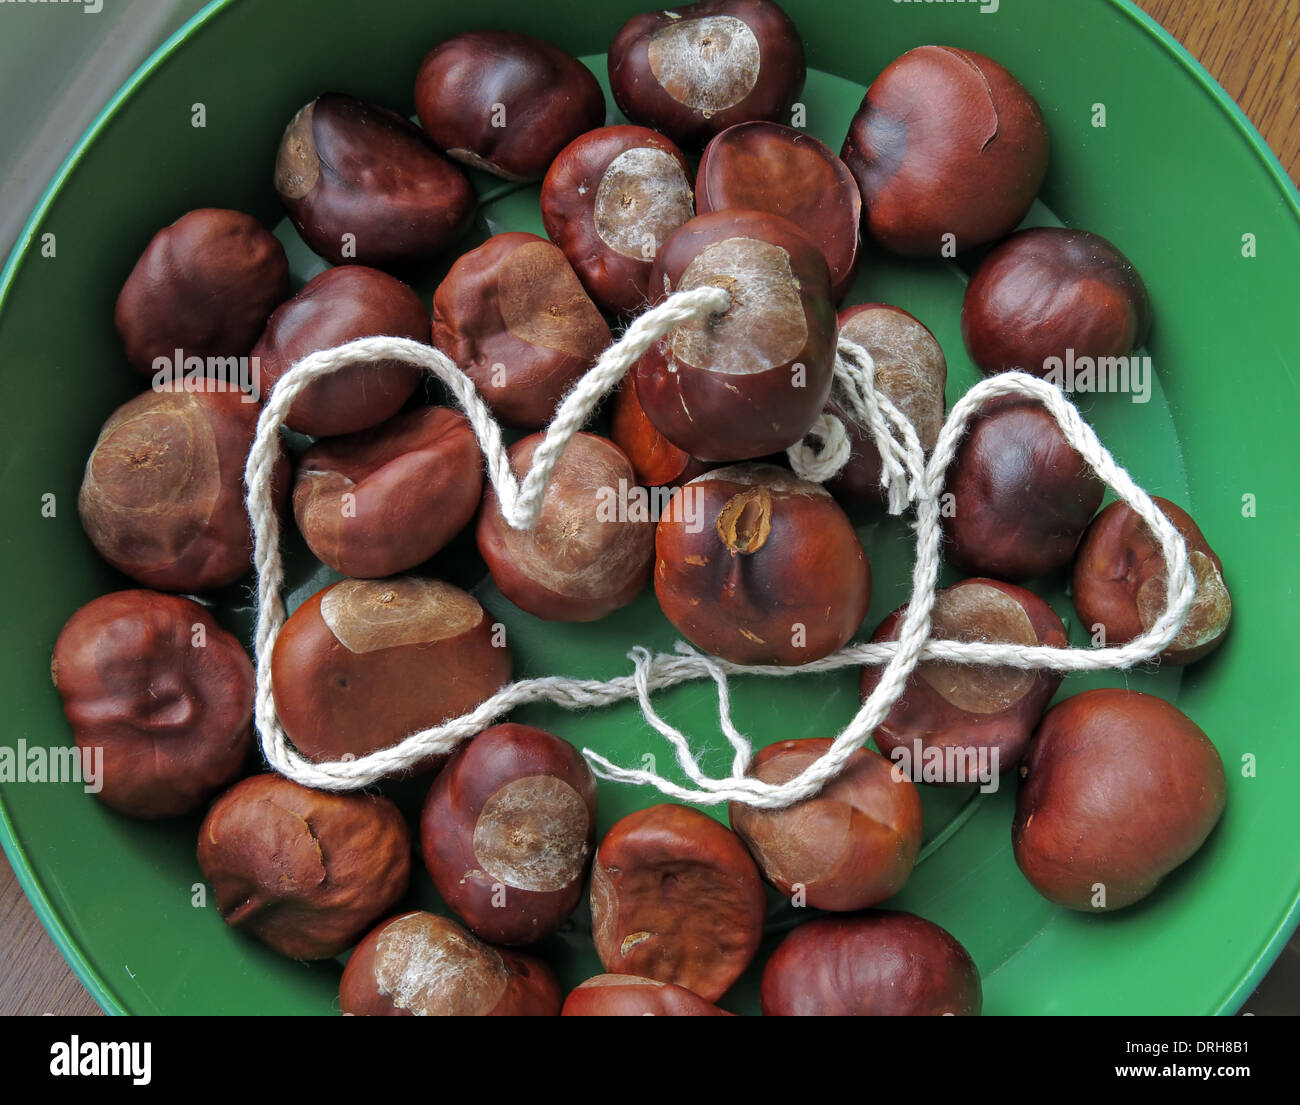 A green tray of conkers ready for a fight Stock Photo